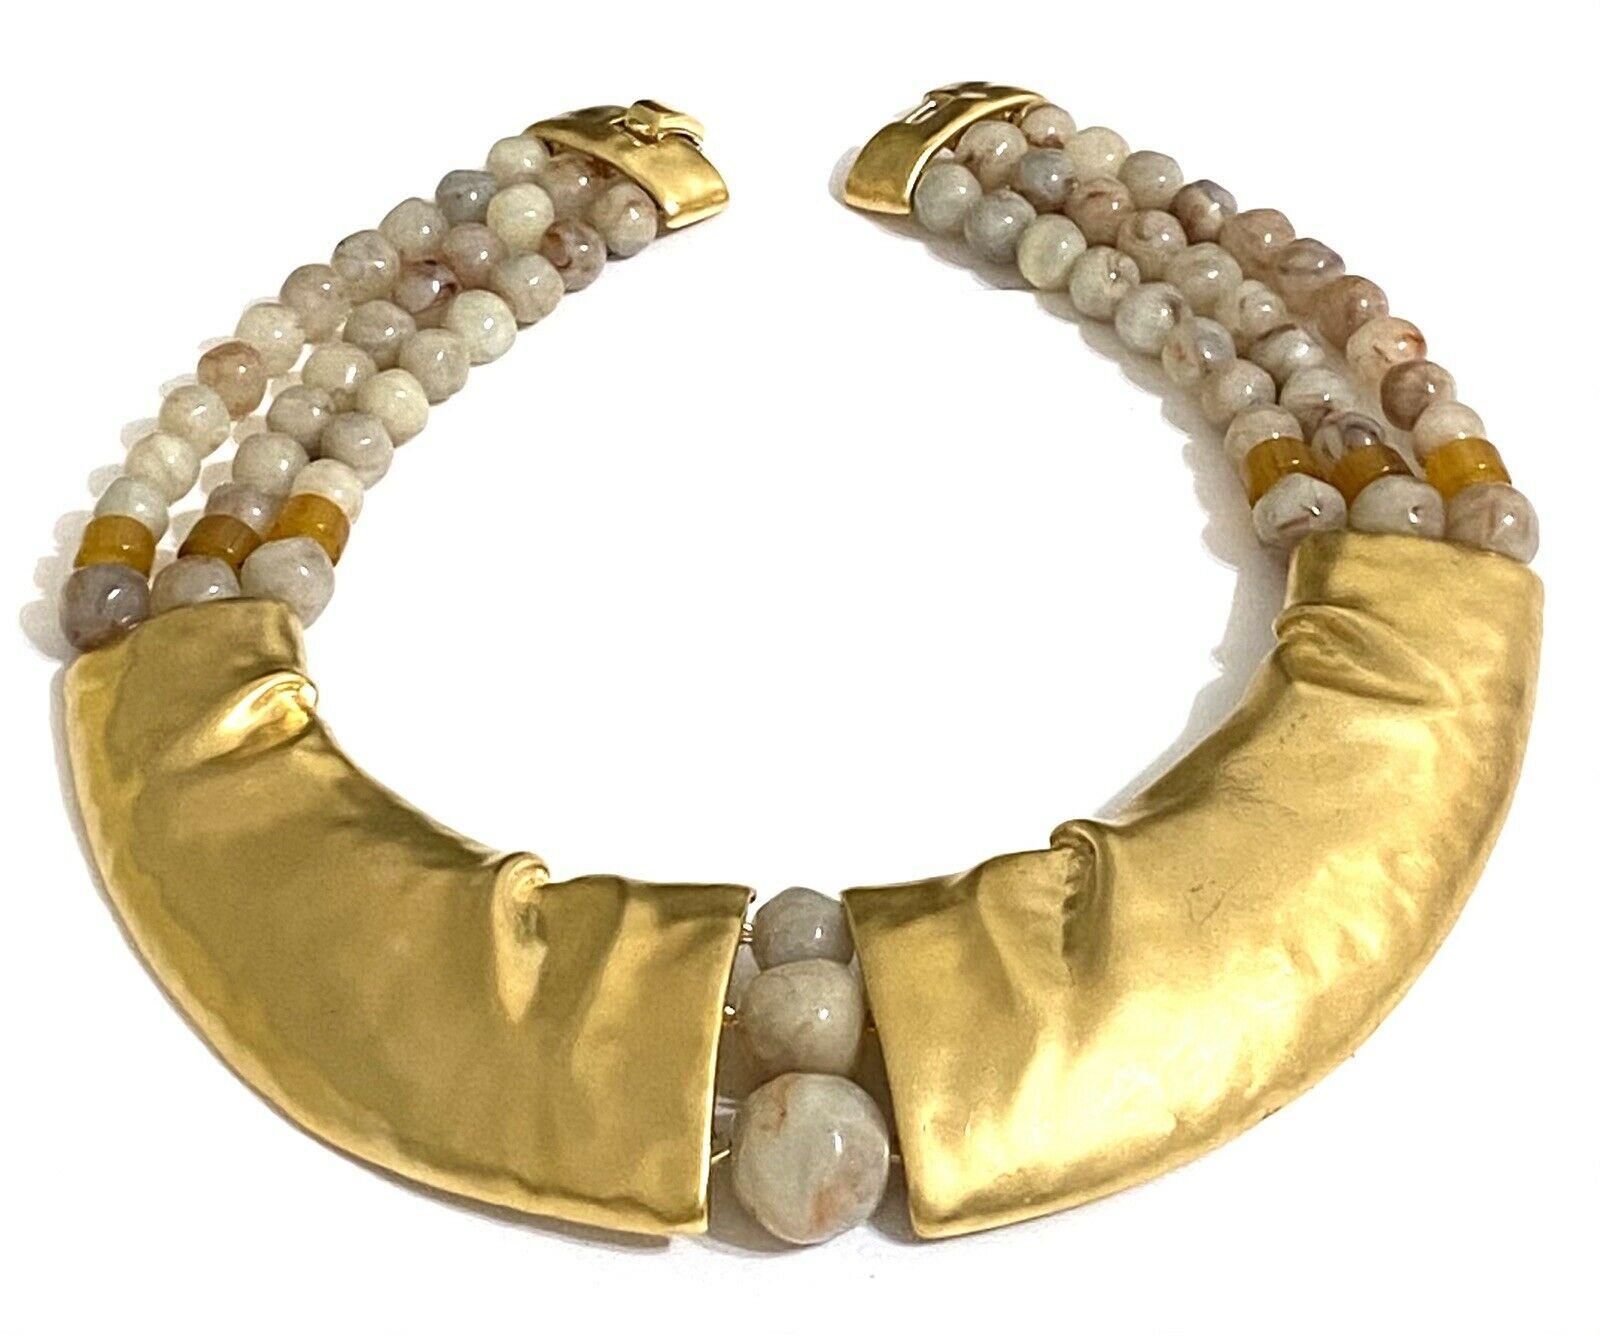 Rare Signed Trifari Designer Lucite Beads Golden Modernist Choker Necklace In Excellent Condition For Sale In Montreal, QC